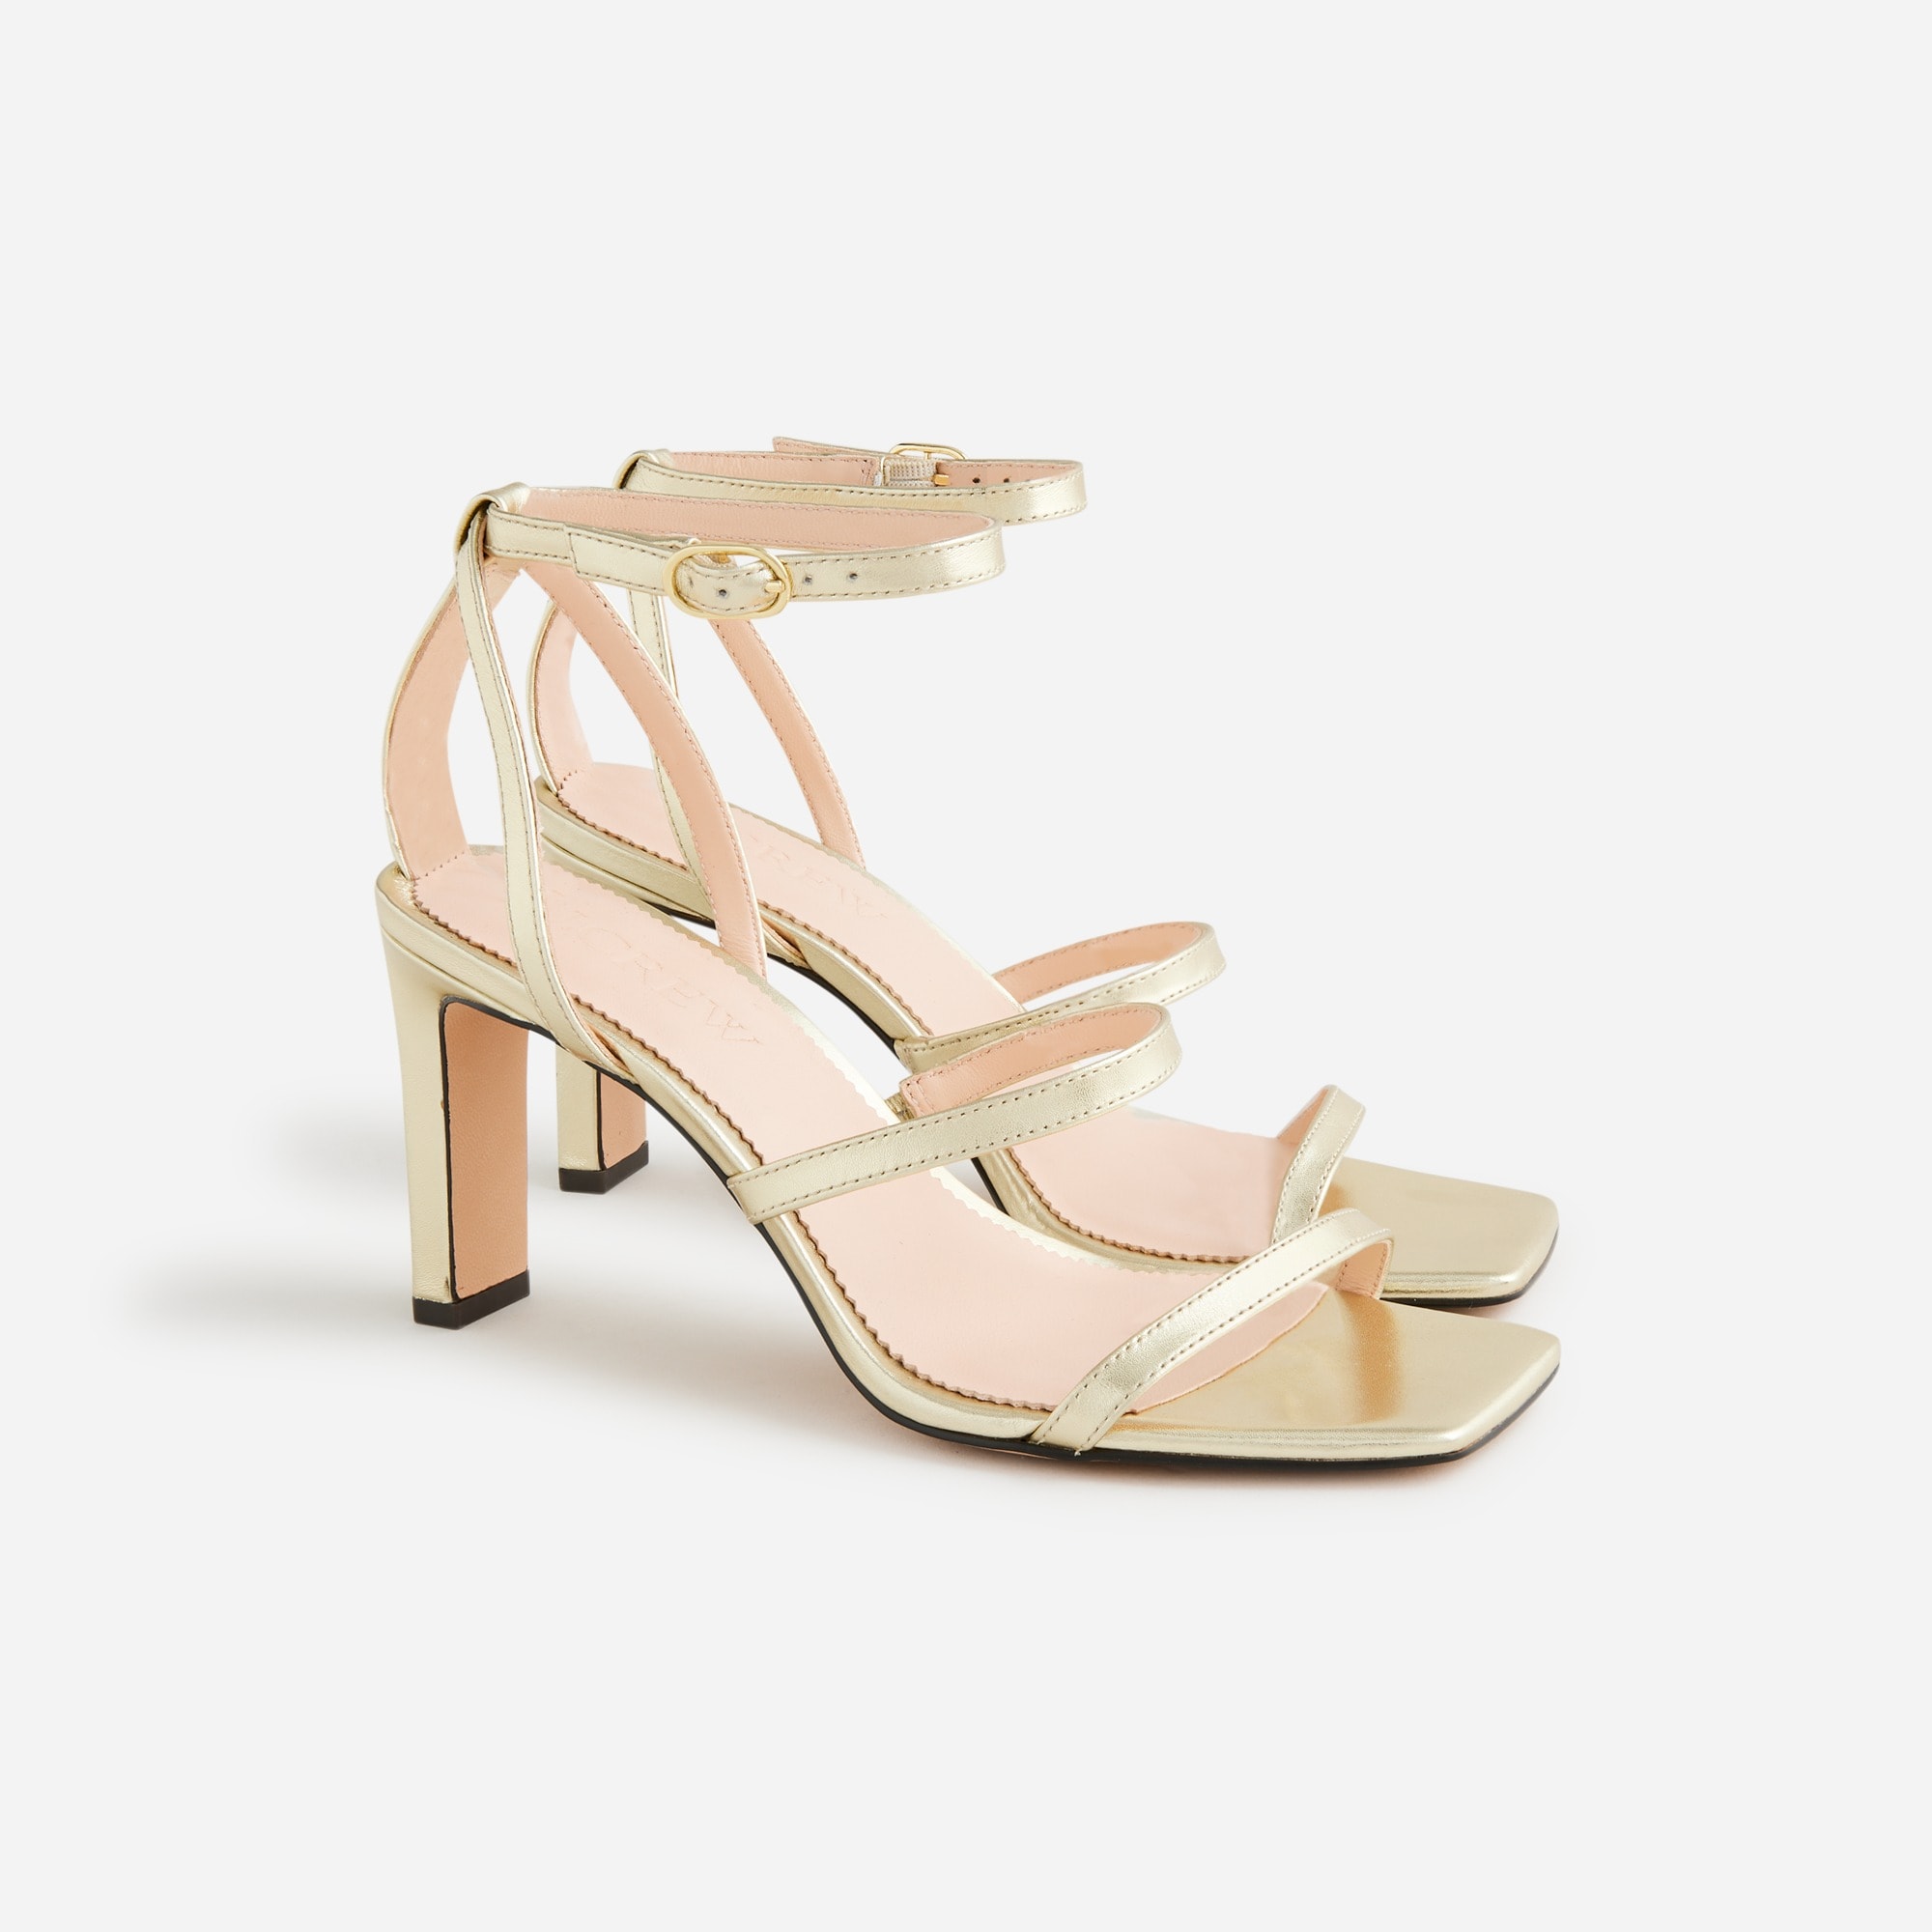  Ava strappy heels in metallic leather